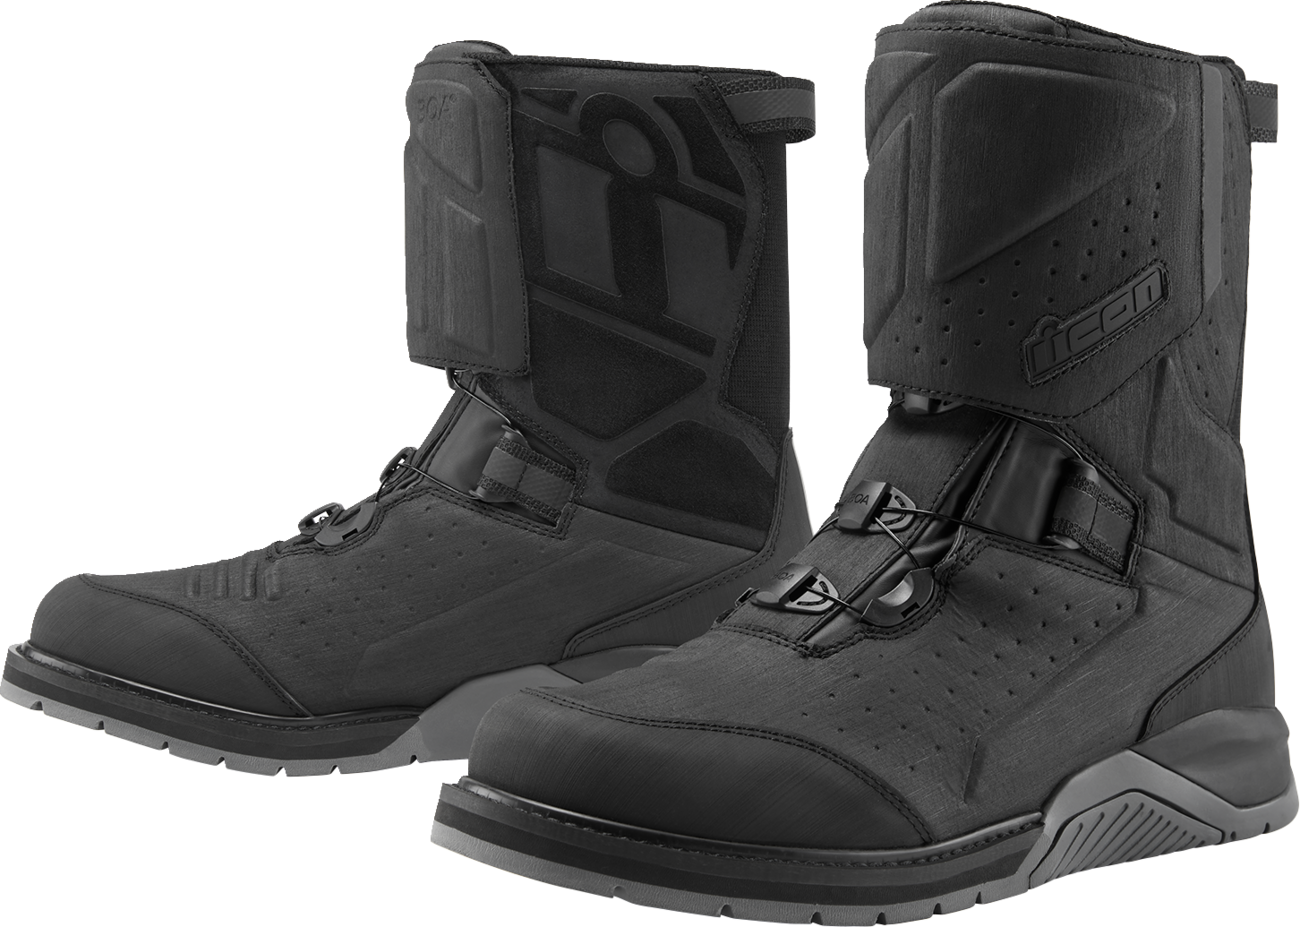 ICON Alcan Waterproof Boots - Black - Size 11 3403-1239